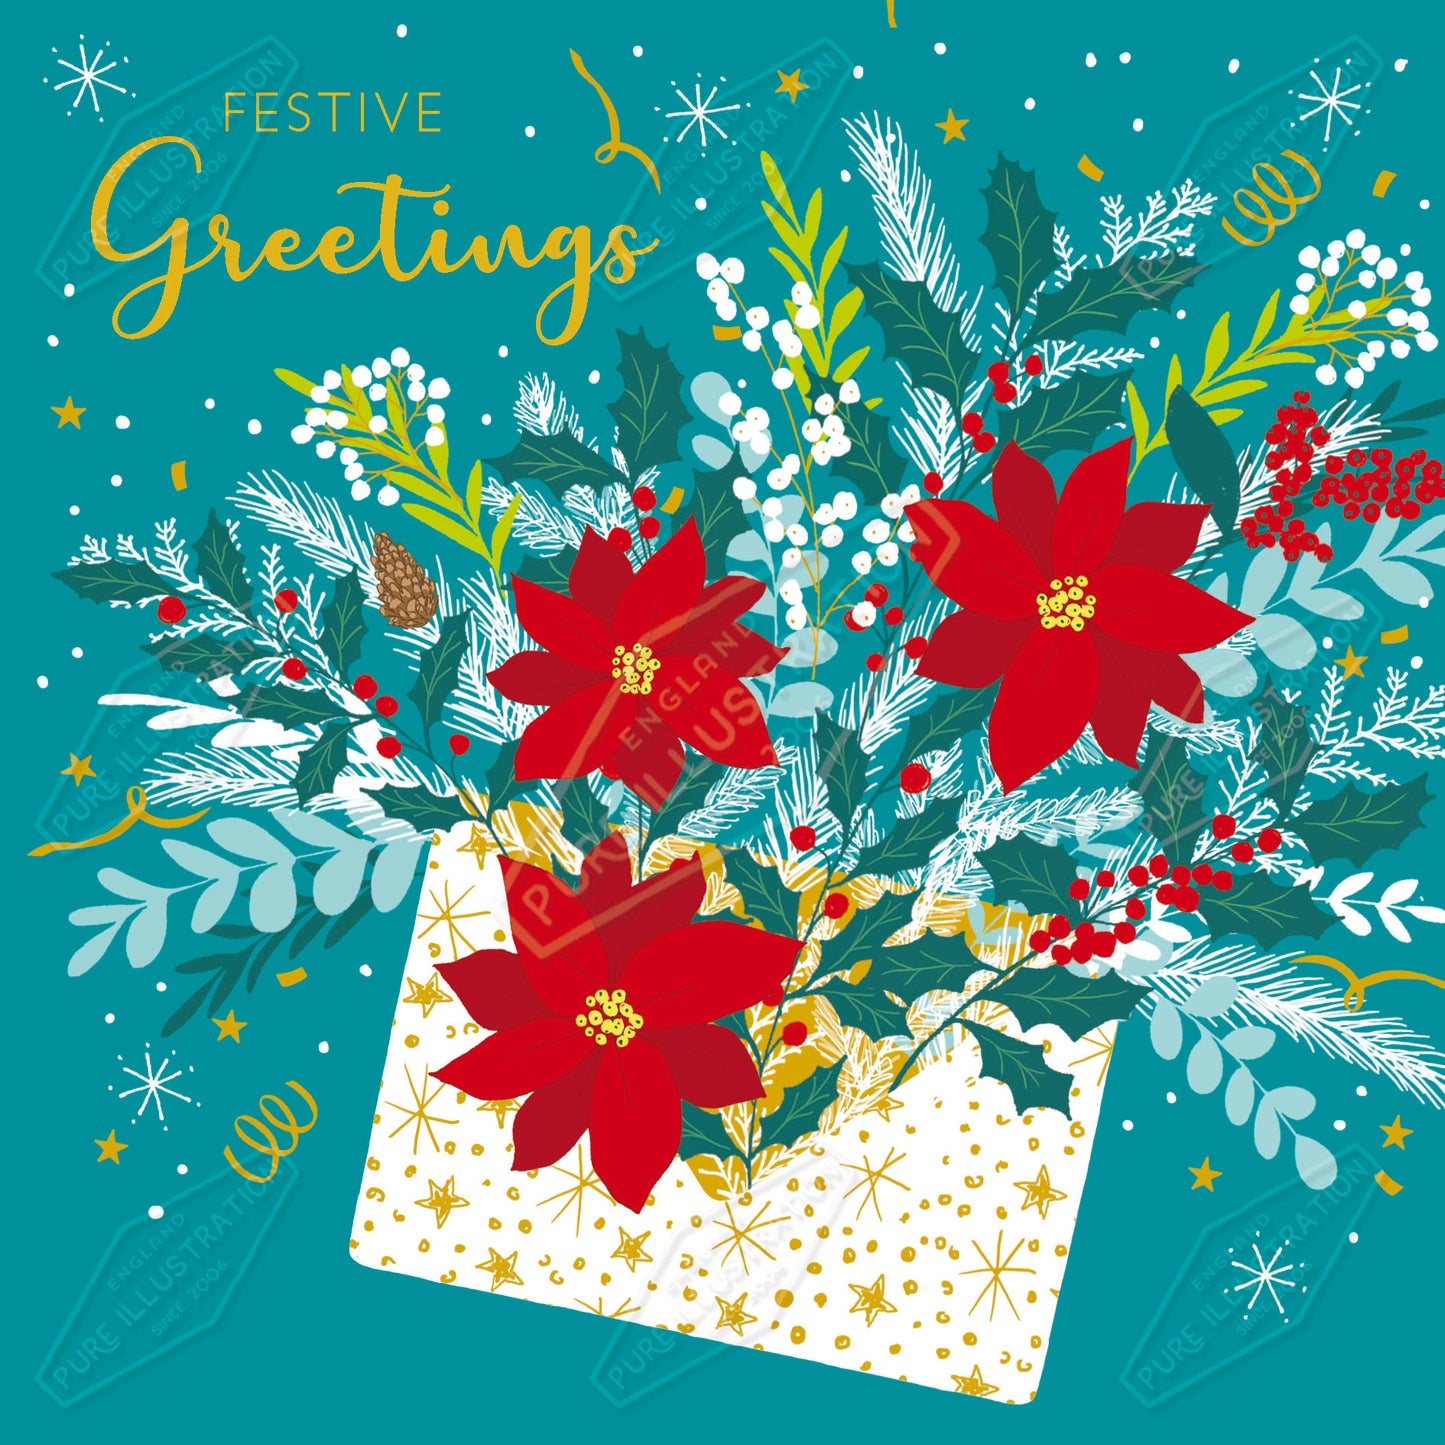 00035567CMI - Caitlin Miller is represented by Pure Art Licensing Agency - Christmas Greeting Card Design